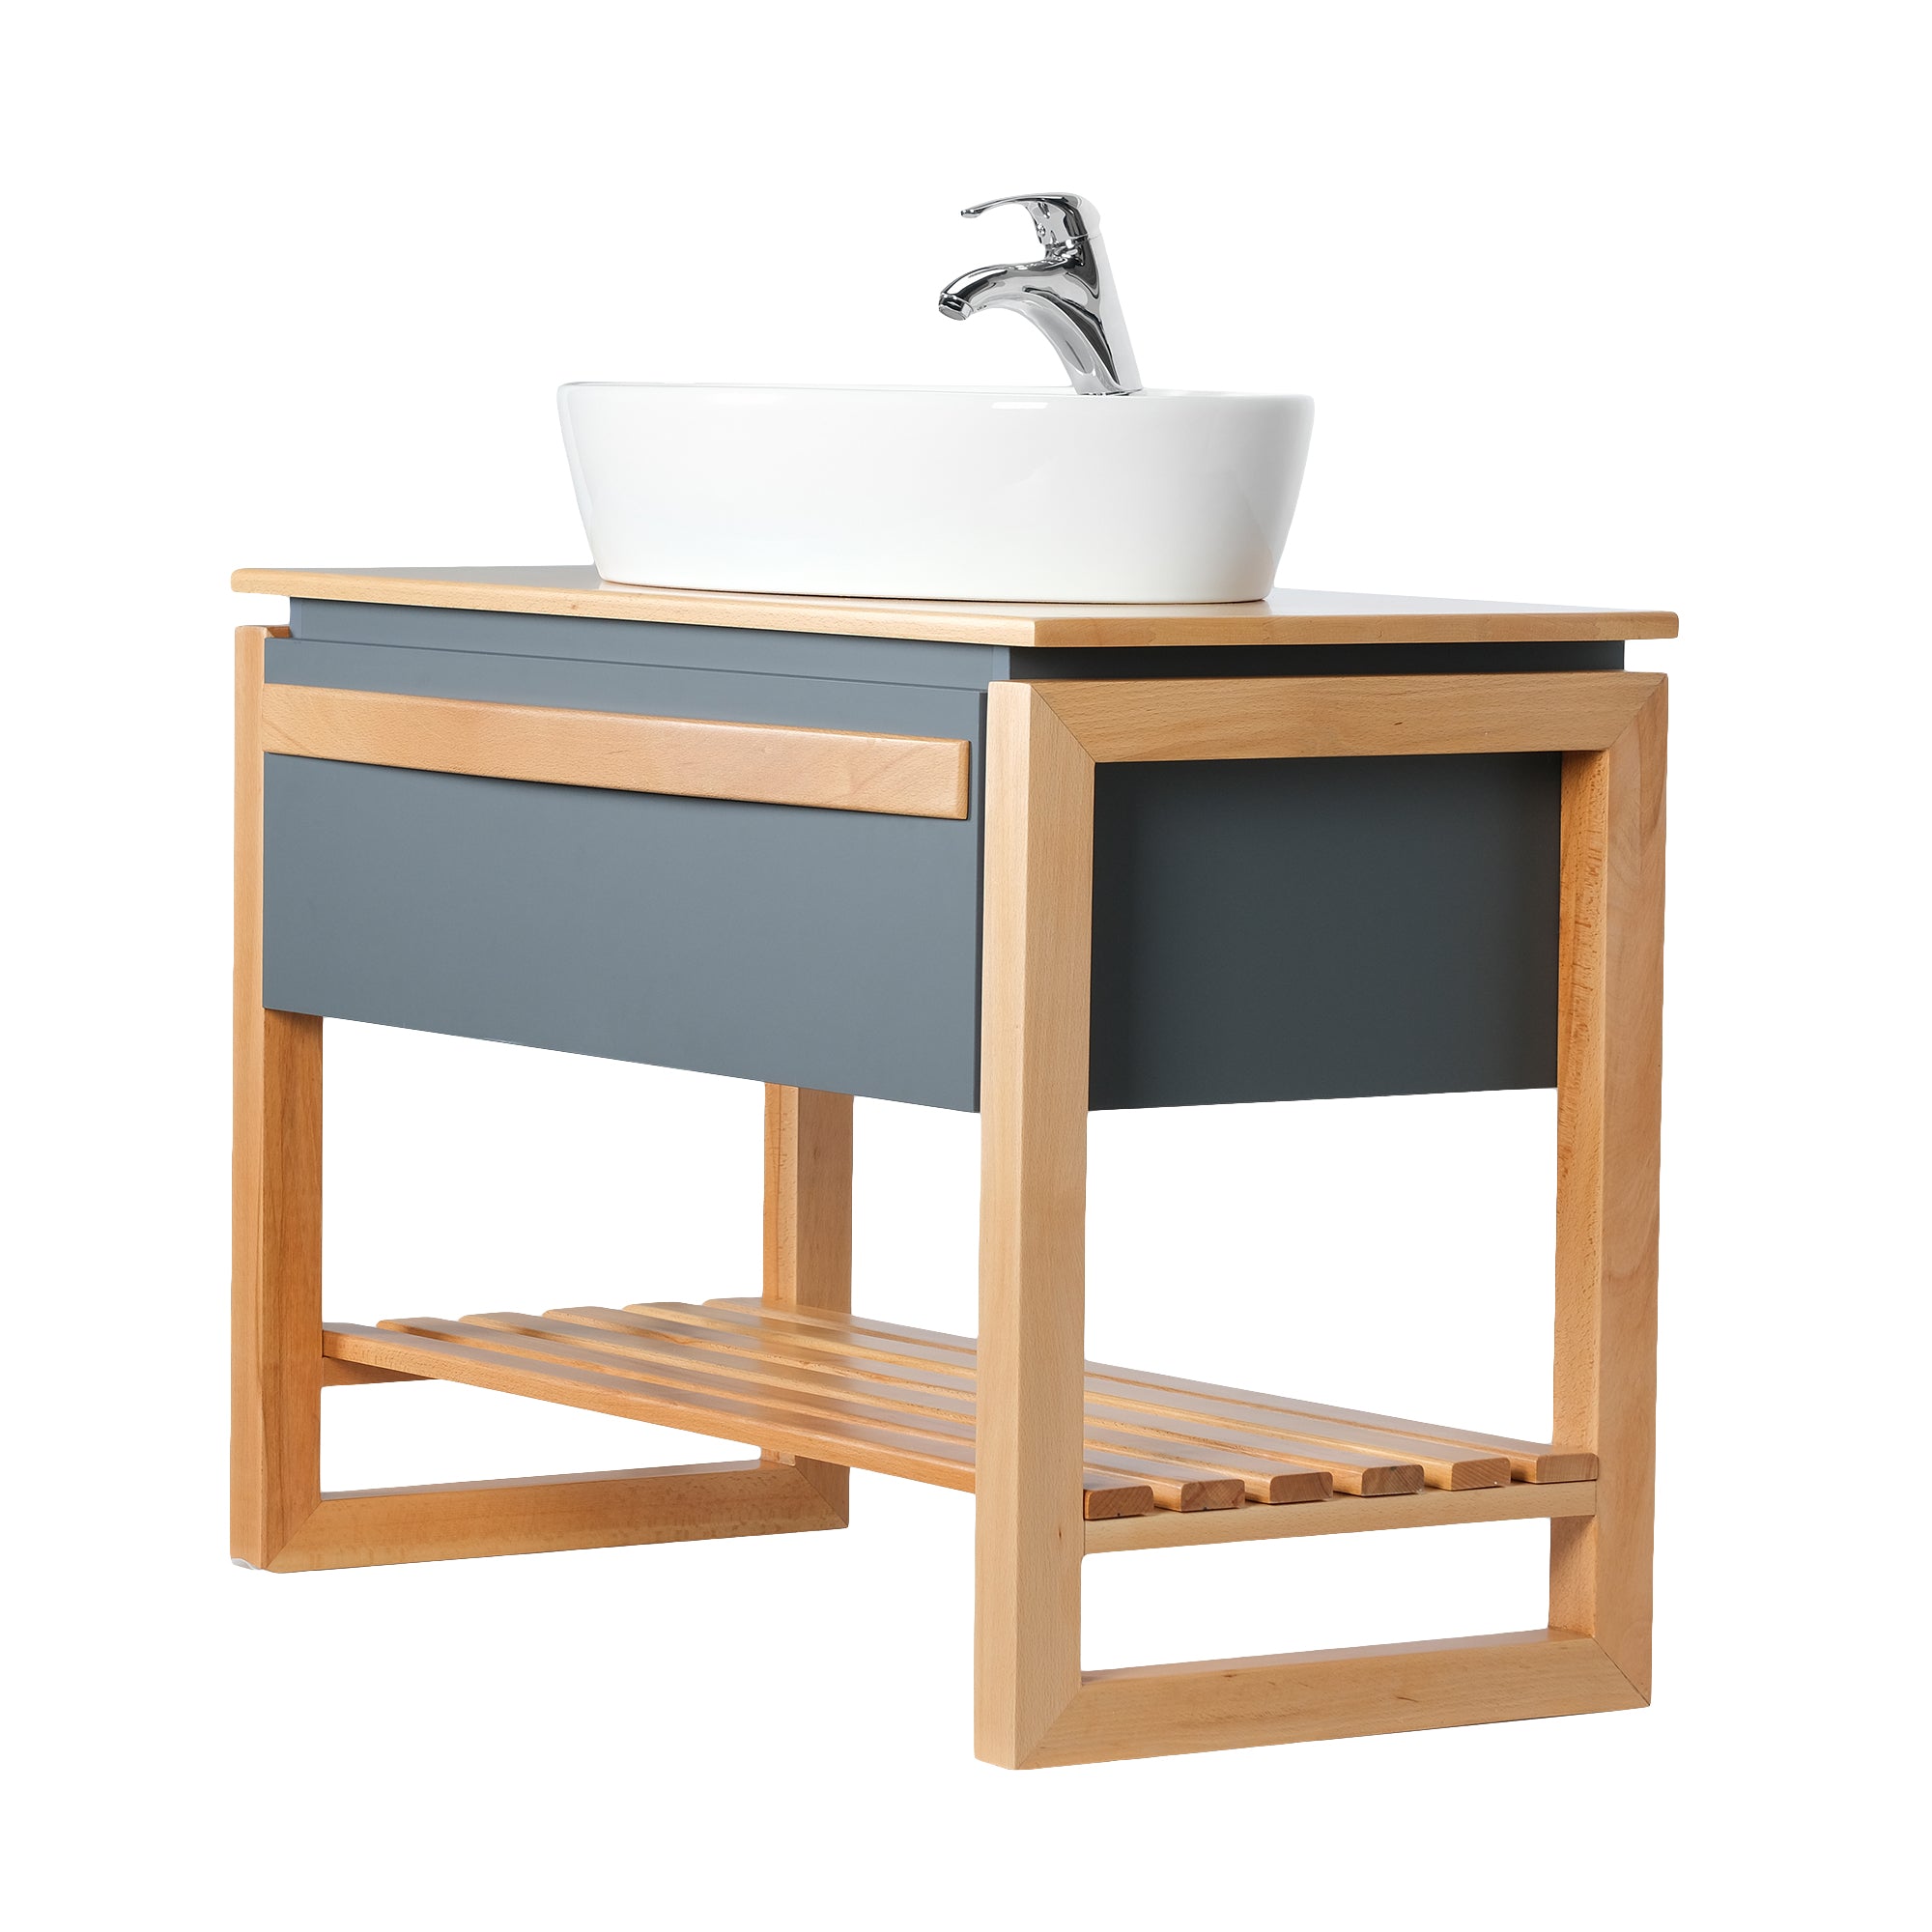 BALI 40 INCH FREE STANDNG VANITY AND SINK COMBO -  OAK AND GRAY